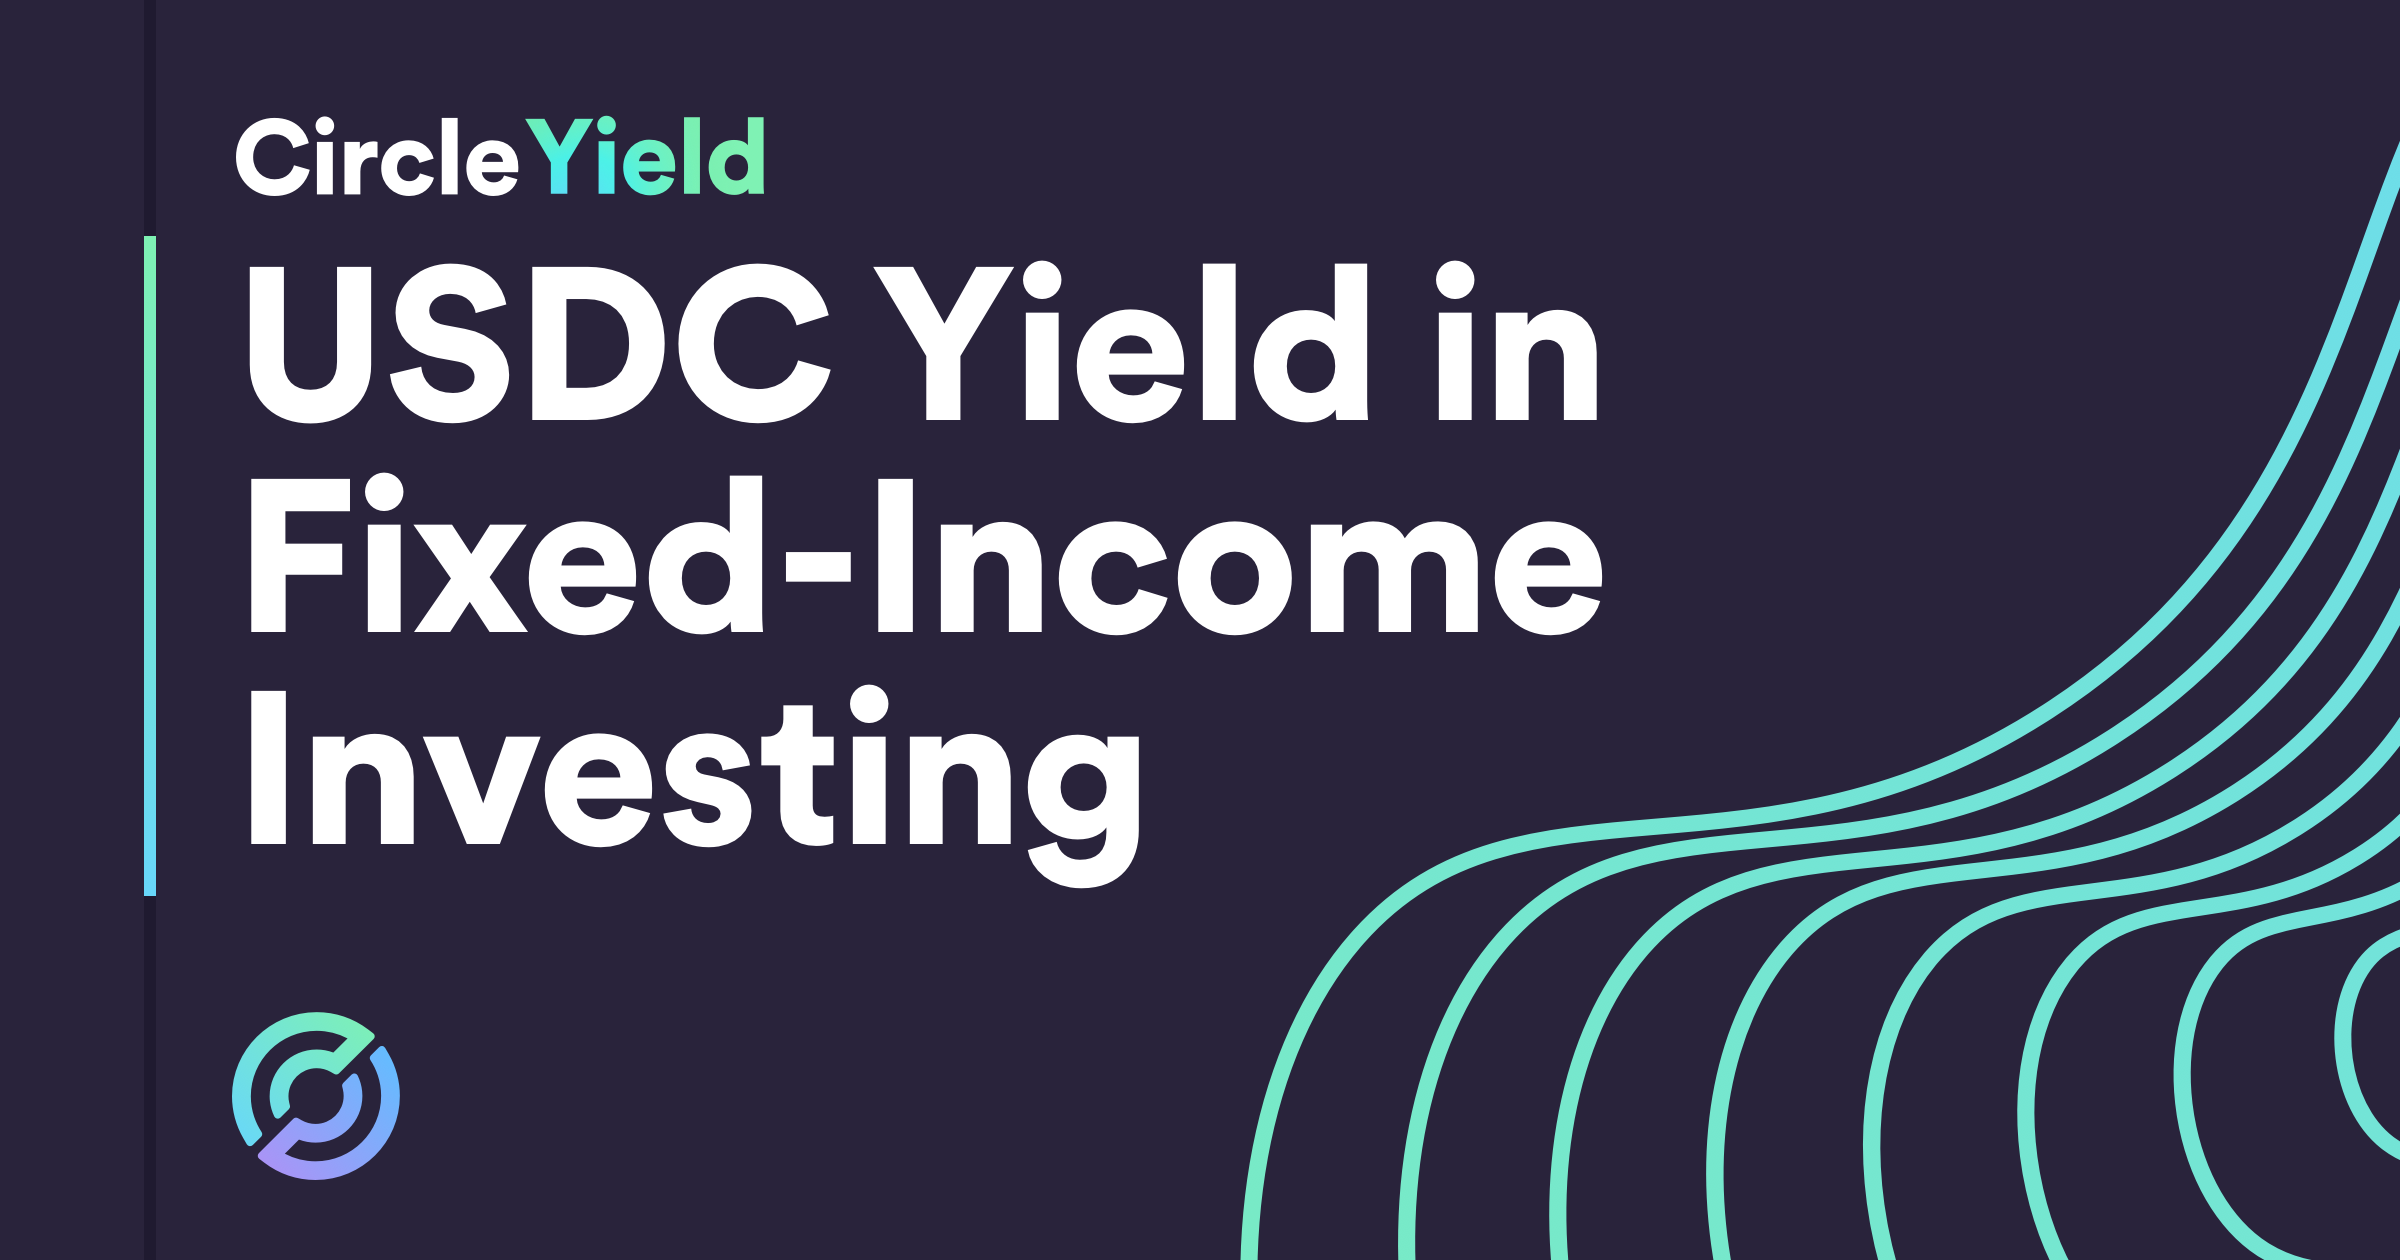 Circle Yield is an alternative fixed-income investment that is built on USDC, the most trusted stablecoin.